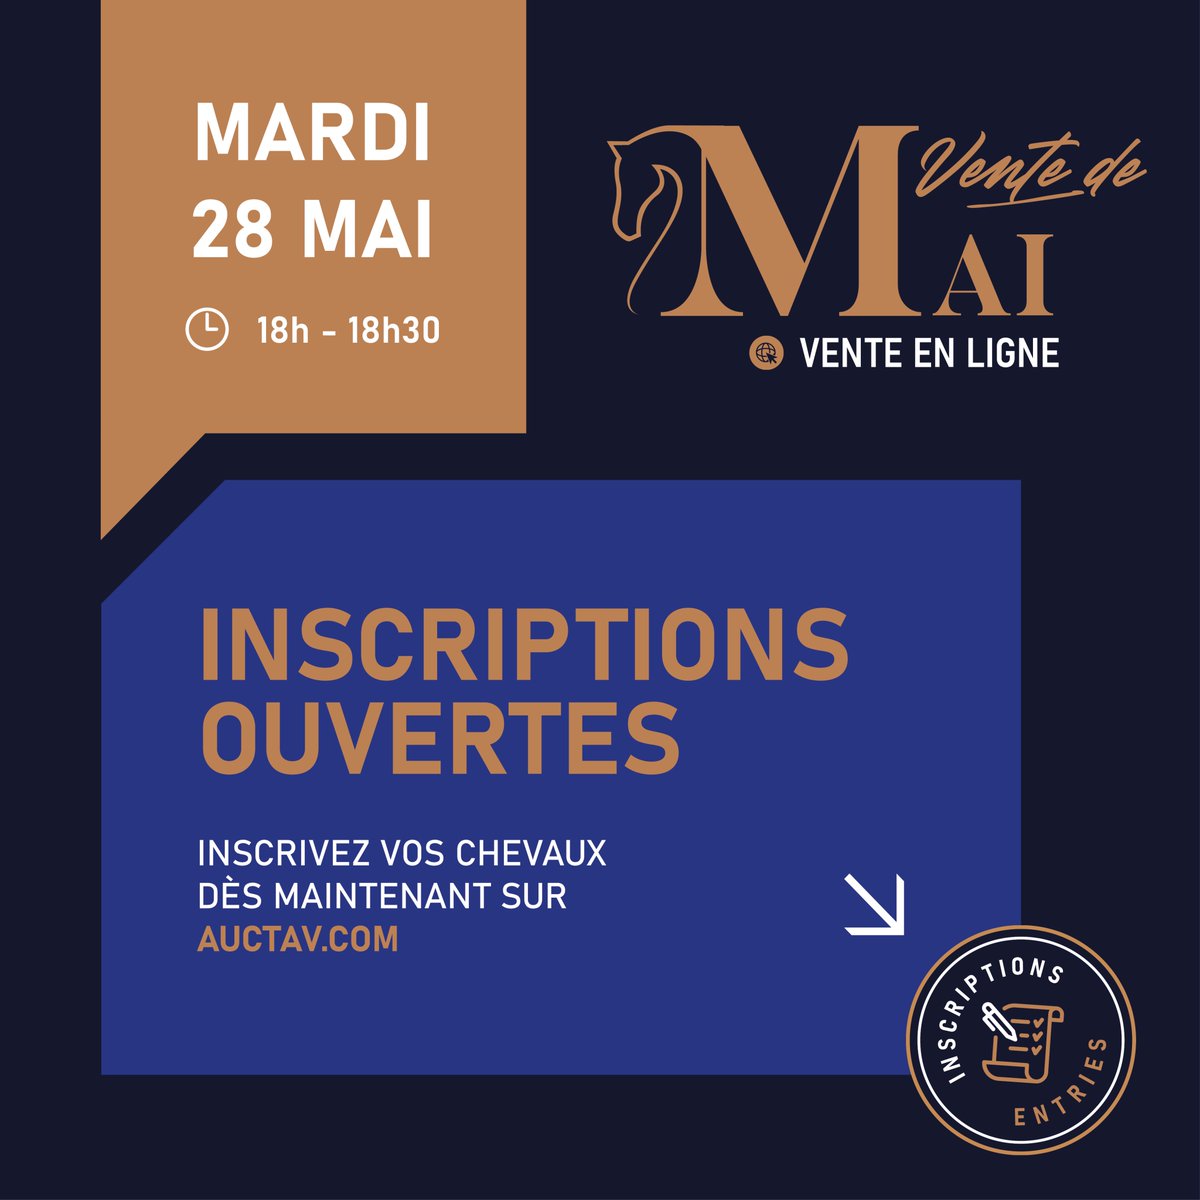 Entries open for our monthly May Sale, open to all horses & disciplines 👉🏻 Enter your horses directly online on auctav.com 🤝🏼 Contact our team for any information: @AngeliaumeA @Jacobwebb9622 @AnthonyGrueau @le_roy_breizh & Stéphane Richard Simon